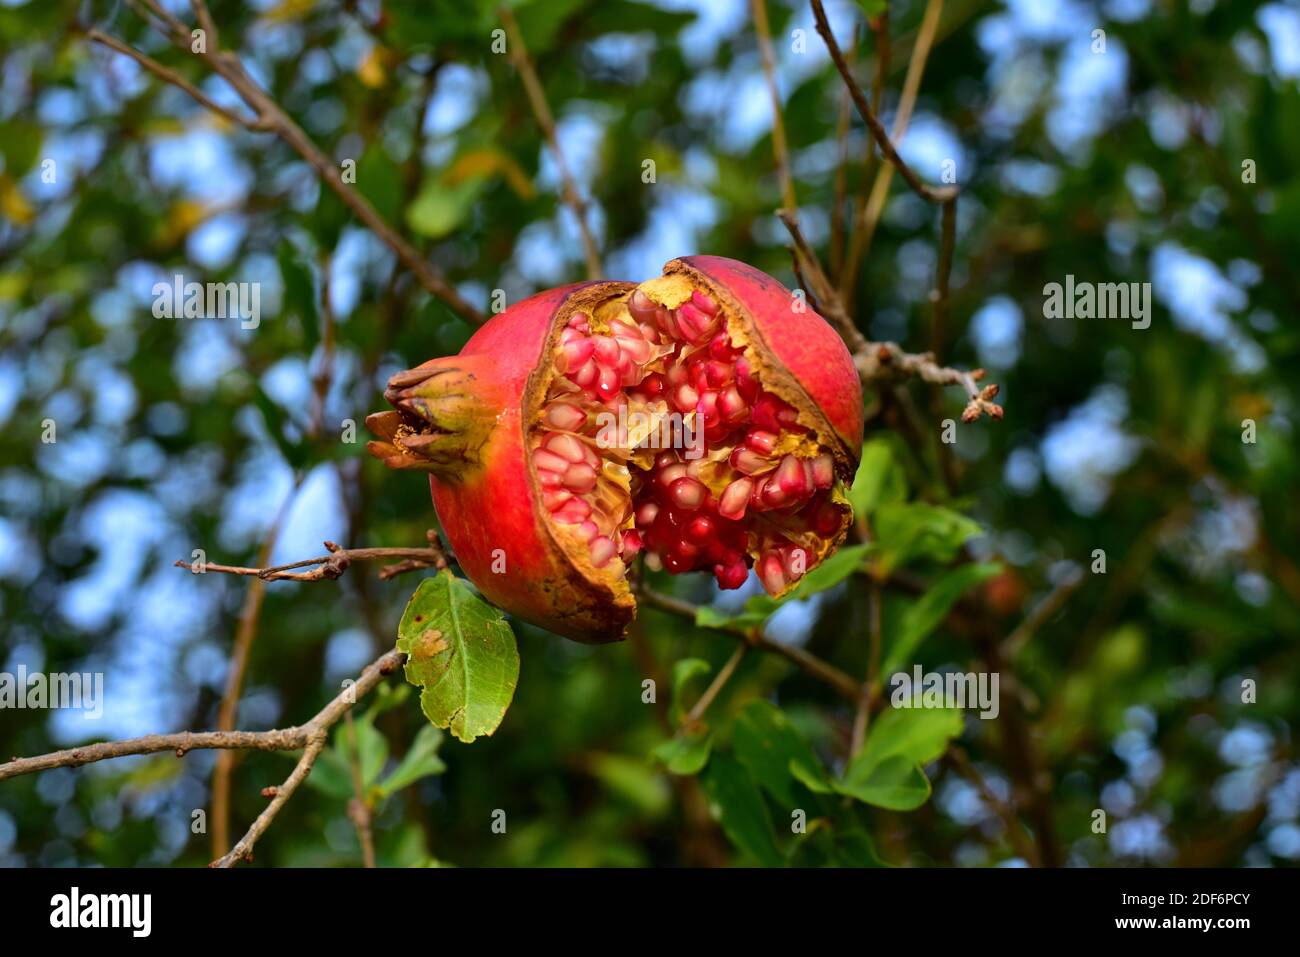 Pomegranate (Punica granatum) is a deciduous shrub native to Asia, from Iran to India. Is widely cultivated for its edible fruits. Stock Photo